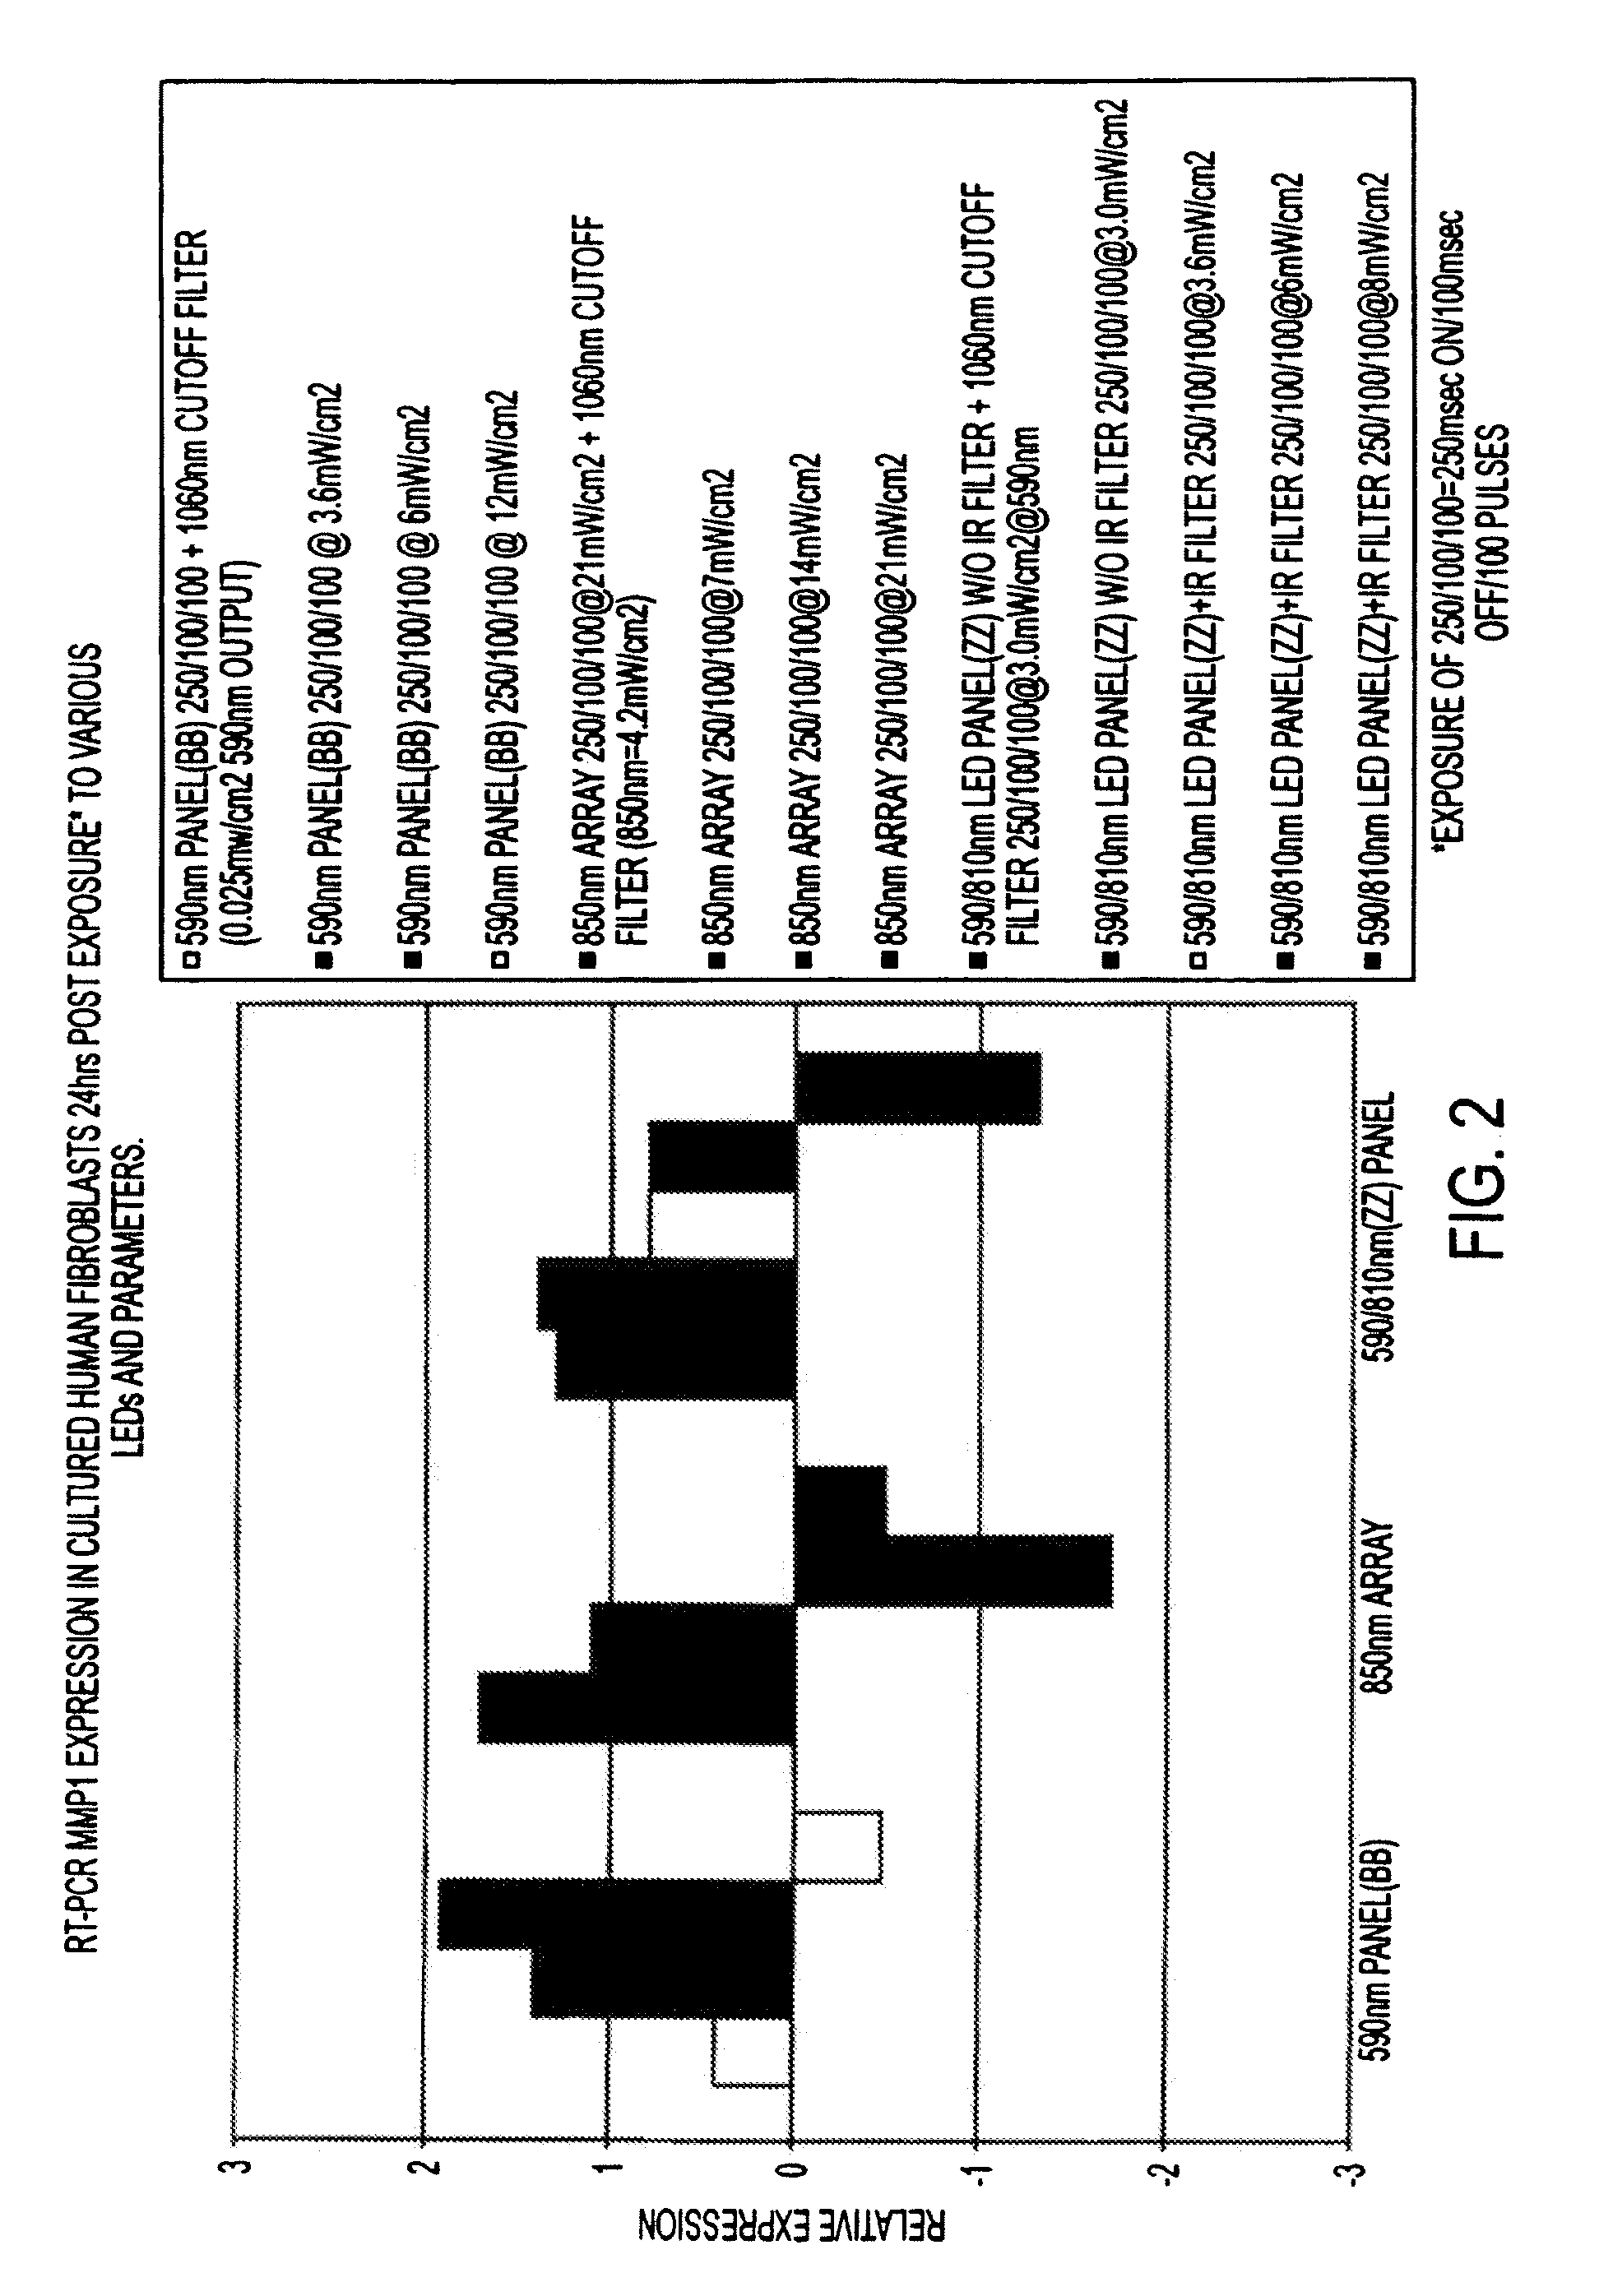 System and method for the photodynamic treatment of burns, wounds, and related skin disorders